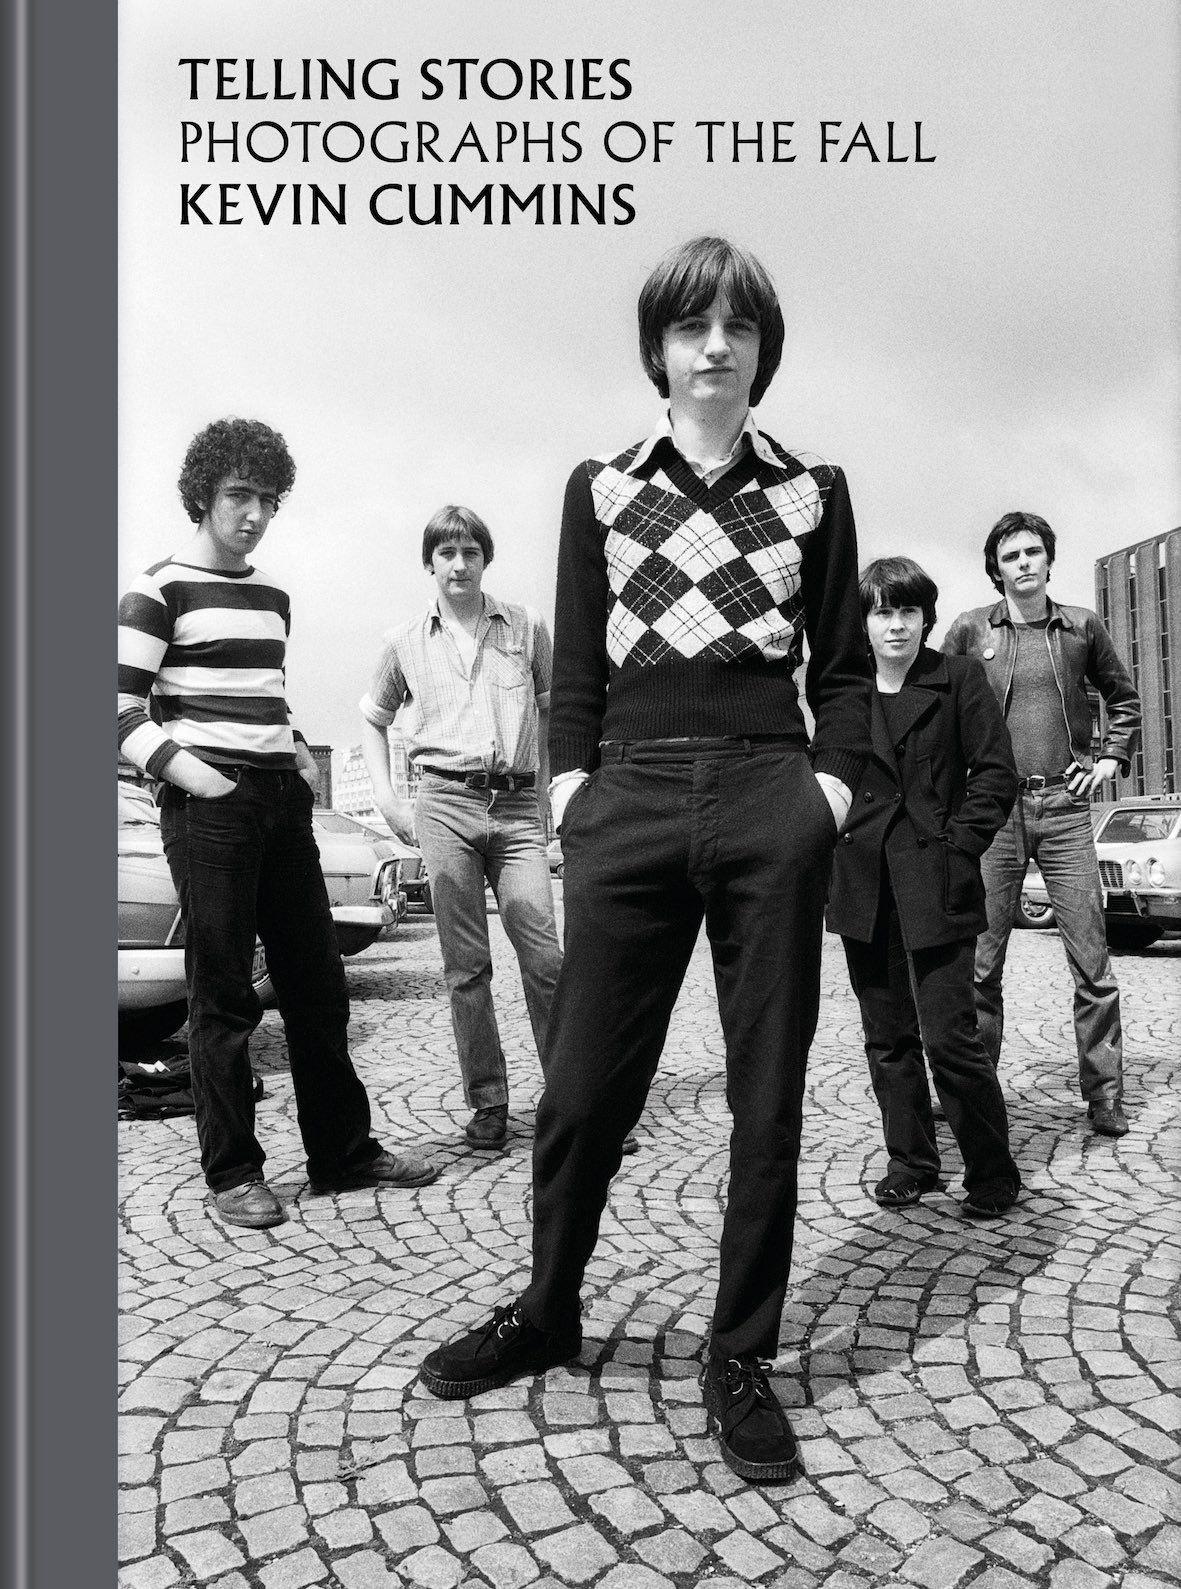 The band The Fall standing on a cobblestone street is the front cover black-and-white photo for the Kevin Cummins book Telling Stories, Photographs of The Fall